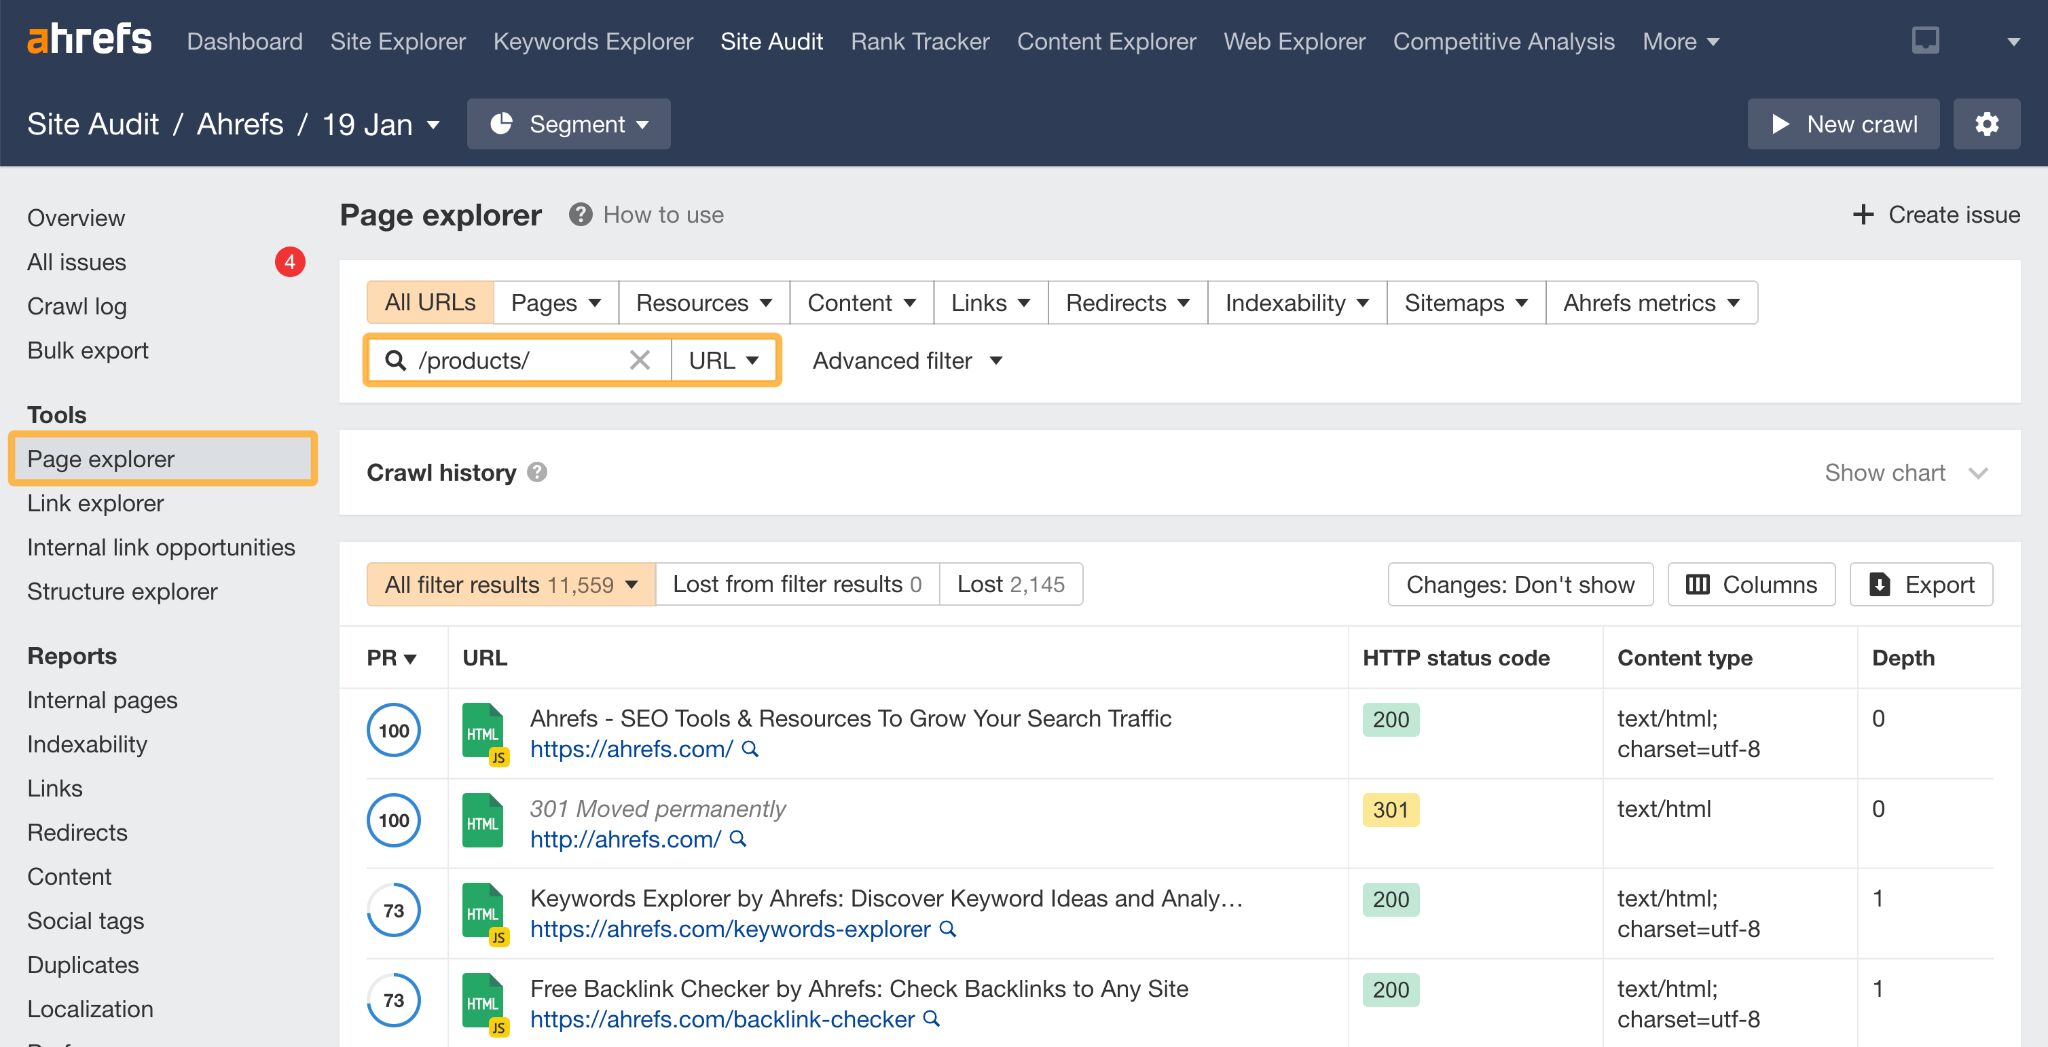 How to filter URLs for /products/ using Ahrefs' Site Audit